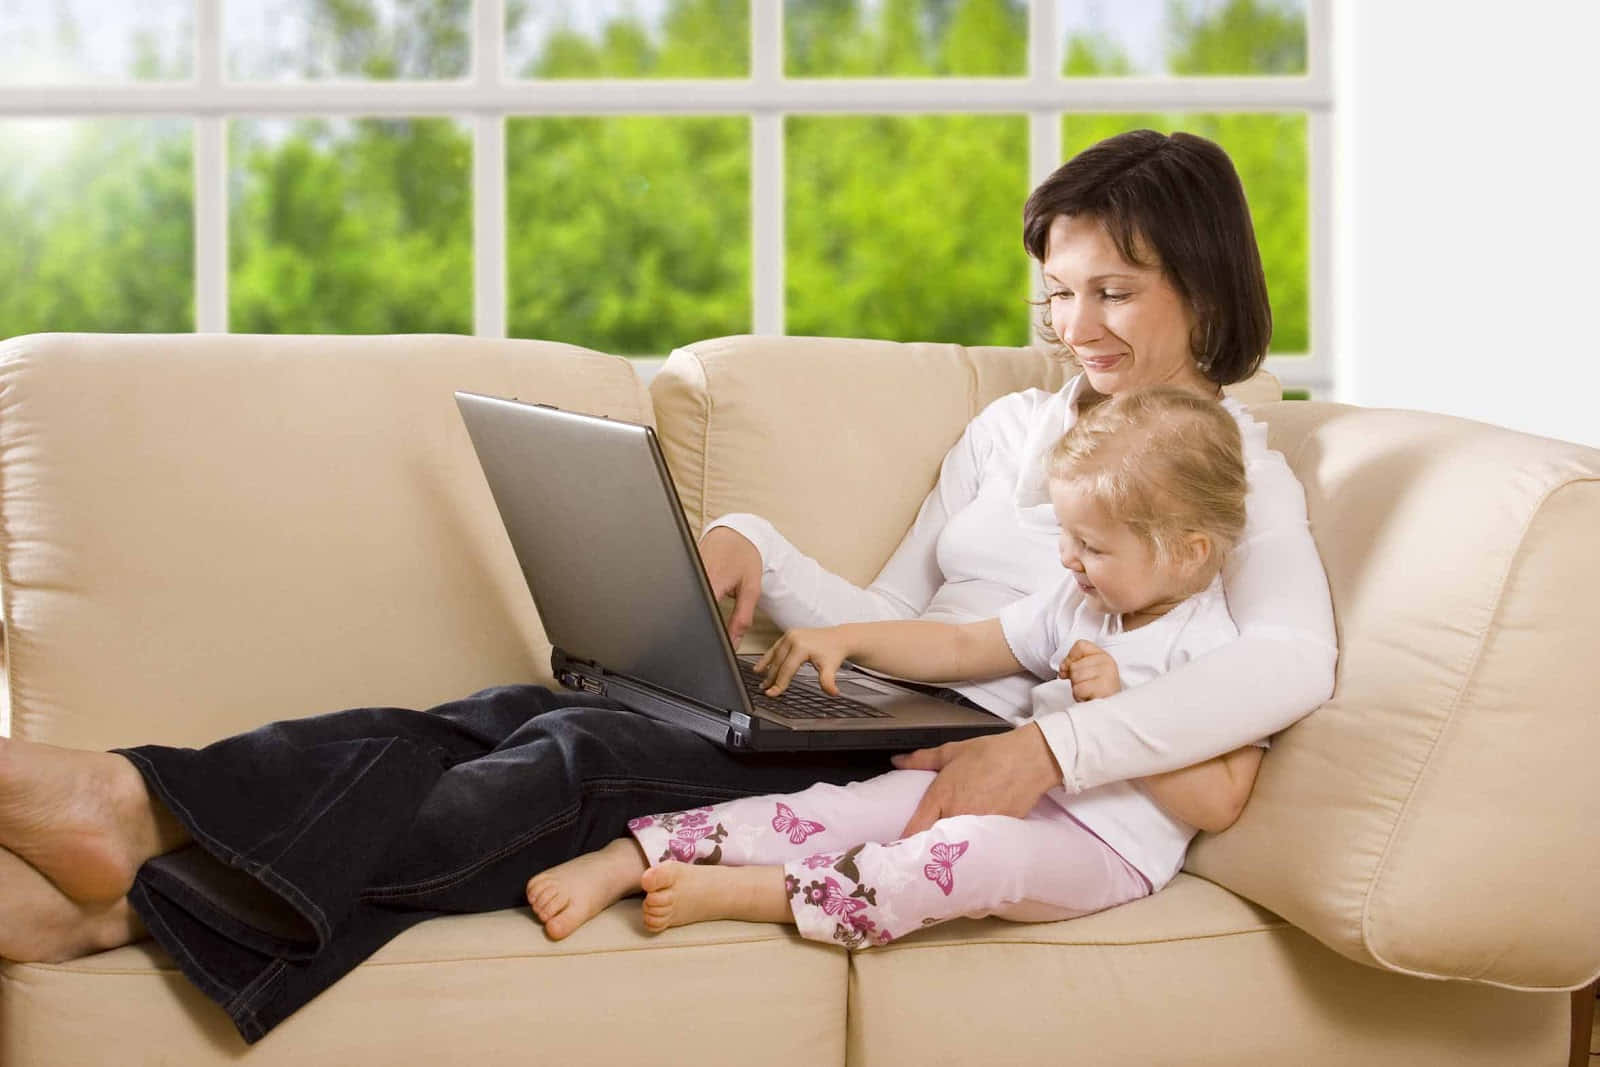 A Woman And Child Sitting On A Couch With A Laptop